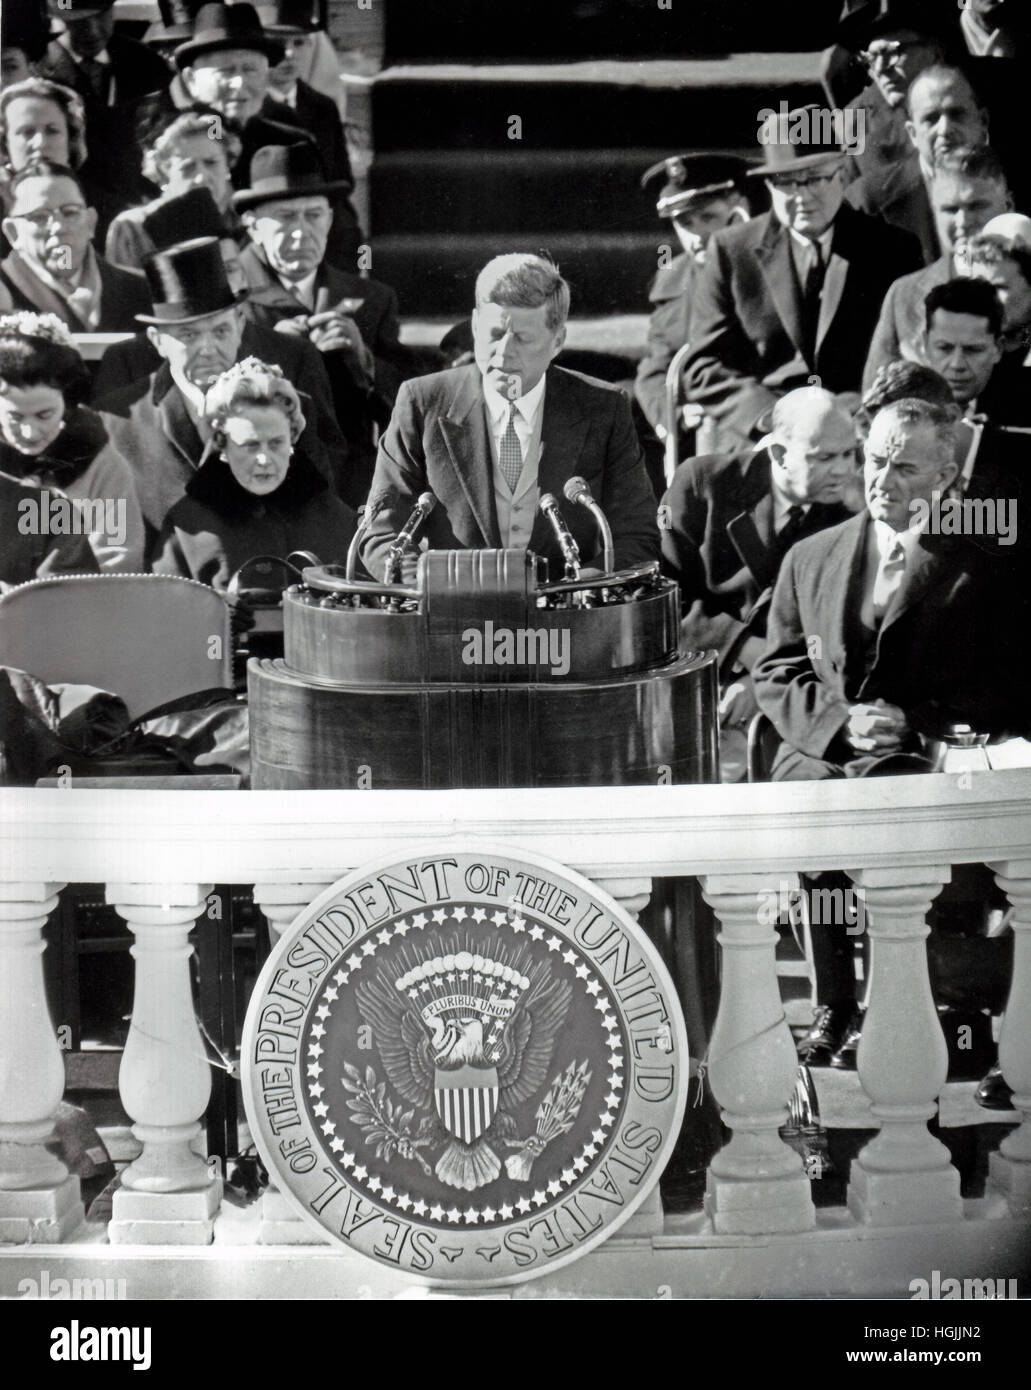 United States President John F. Kennedy delivers his Inaugural Address after being sworn-in as the 35th President of the United States on the East Front of the U.S. Capitol in Washington, DC on Friday, January 20, 1961. U.S. Vice President Lyndon B. Johnson looks on from right.Credit: Arnie Sachs/CNP - NO WIRE SERVICE - Photo: Arnie Sachs/Consolidated News Photos/Arnie Sachs - CNP Stock Photo